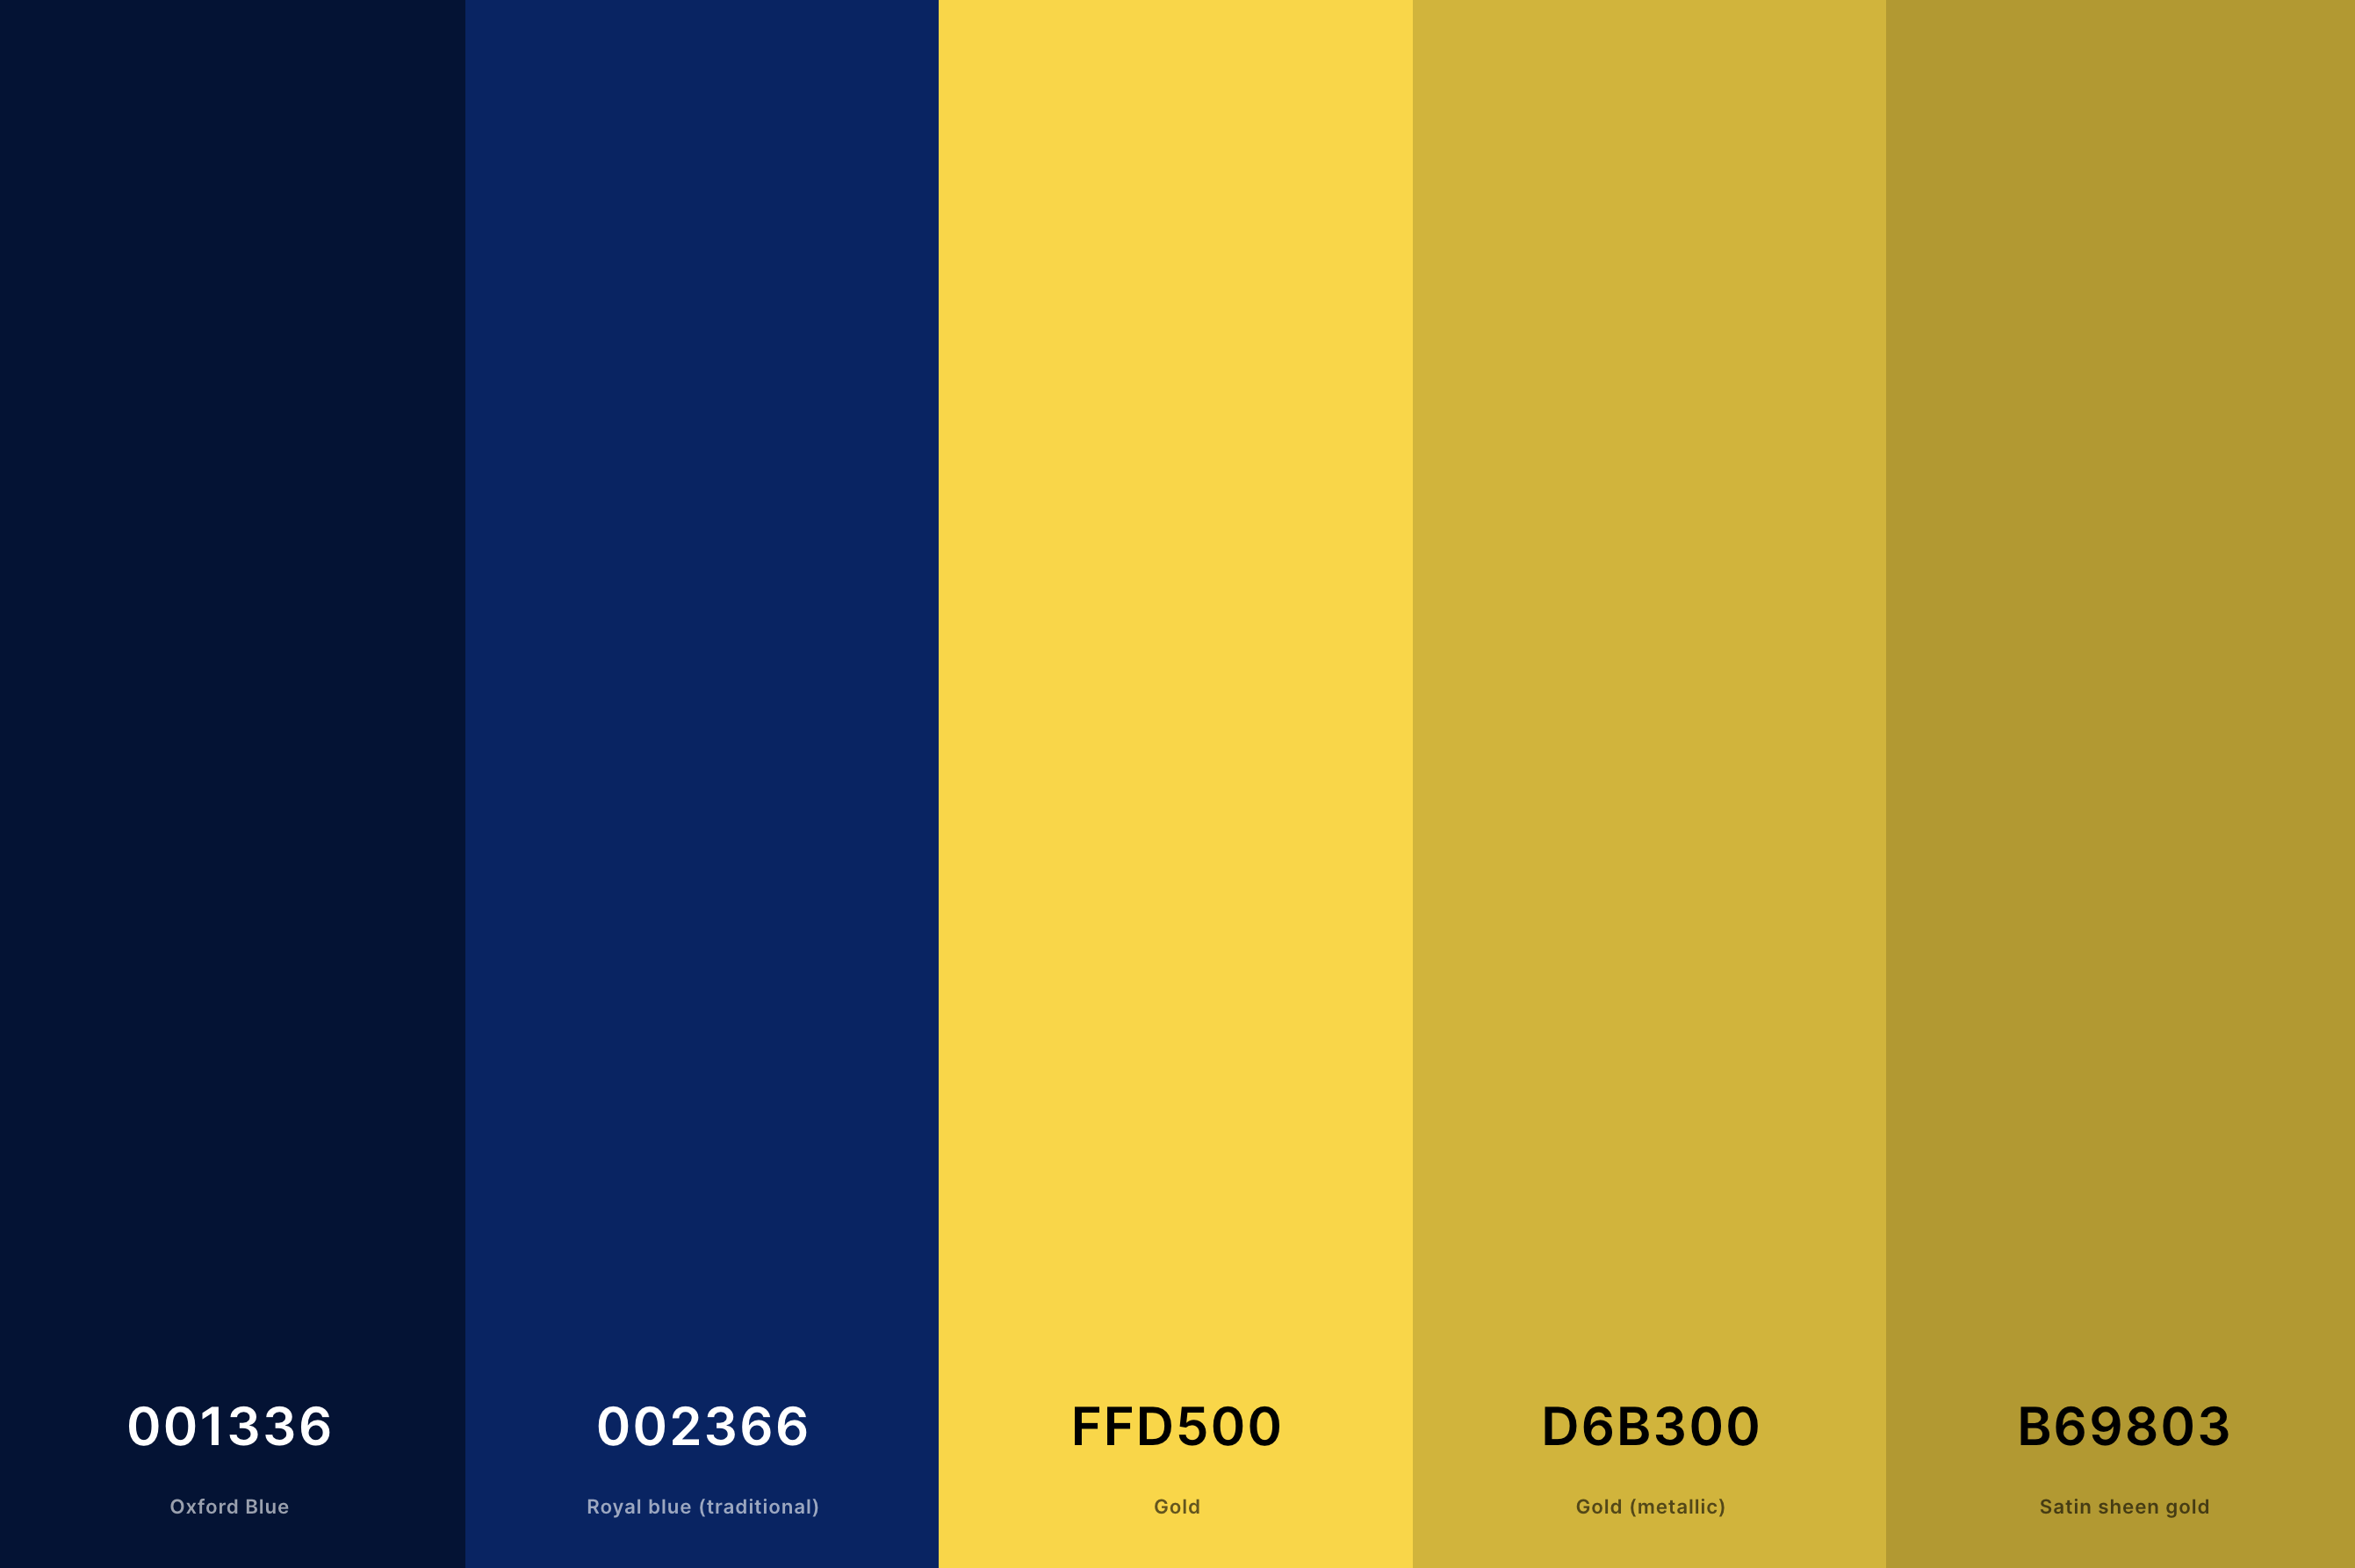 16. Royal Blue And Gold Color Palette Color Palette with Oxford Blue (Hex #001336) + Royal Blue (Traditional) (Hex #002366) + Gold (Hex #FFD500) + Gold (Metallic) (Hex #D6B300) + Satin Sheen Gold (Hex #B69803) Color Palette with Hex Codes